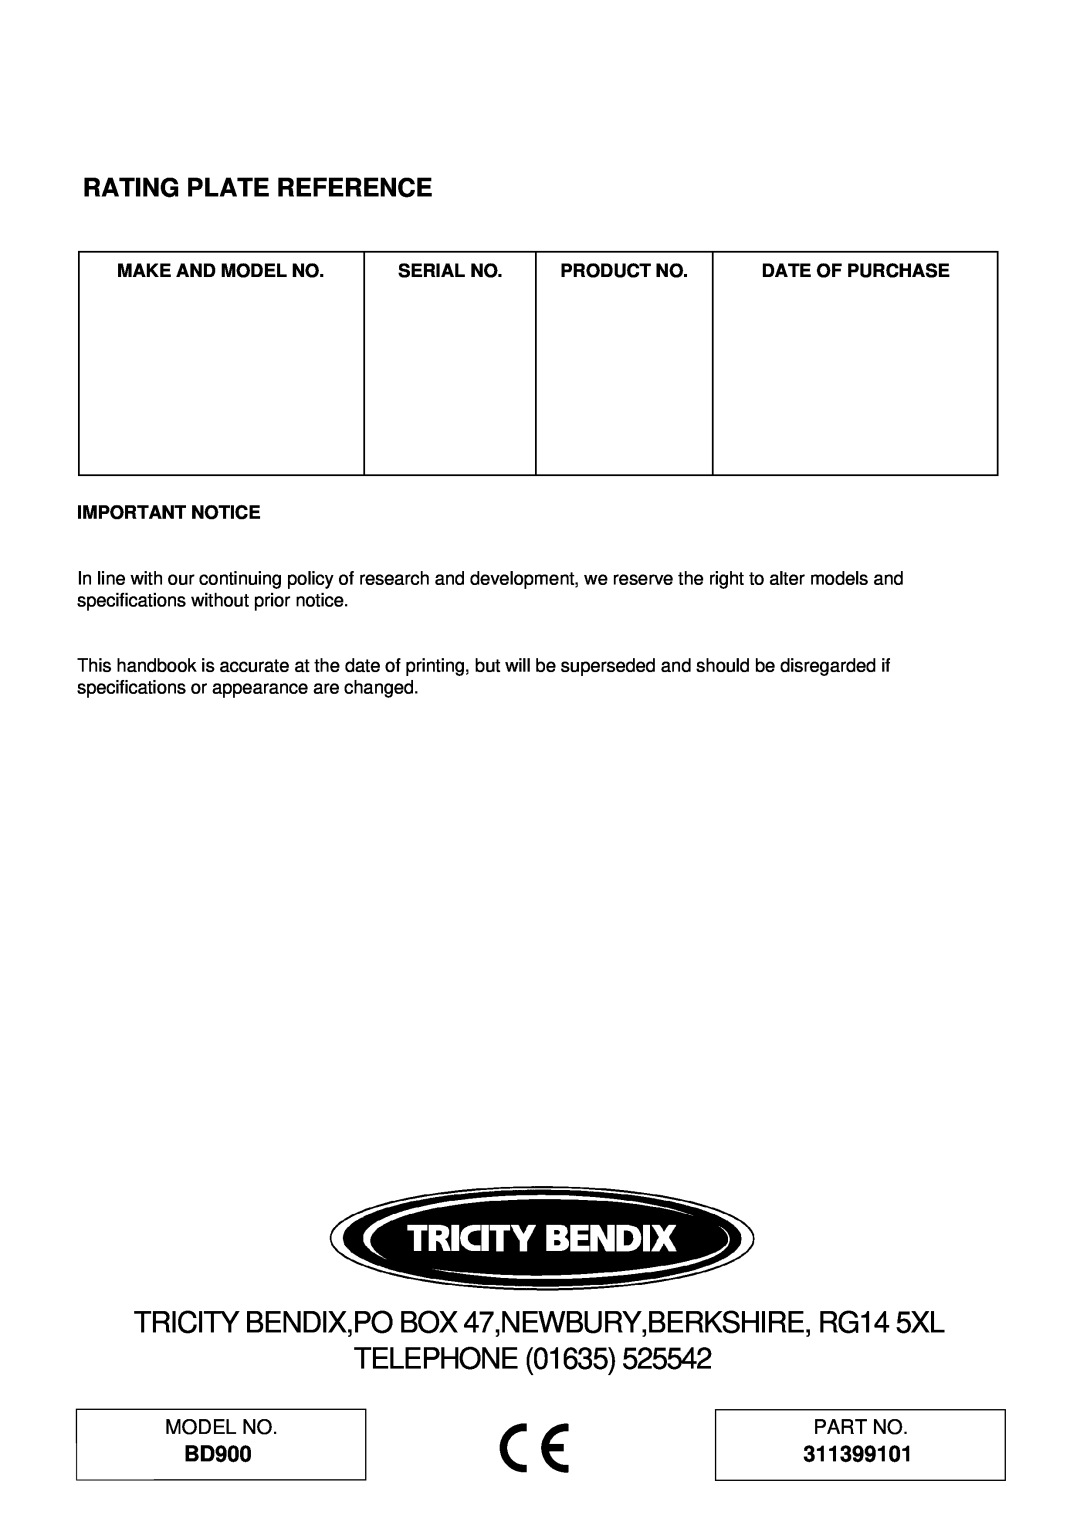 Tricity Bendix BD900 Rating Plate Reference, 311399101, Telephone, Make And Model No, Serial No, Product No 